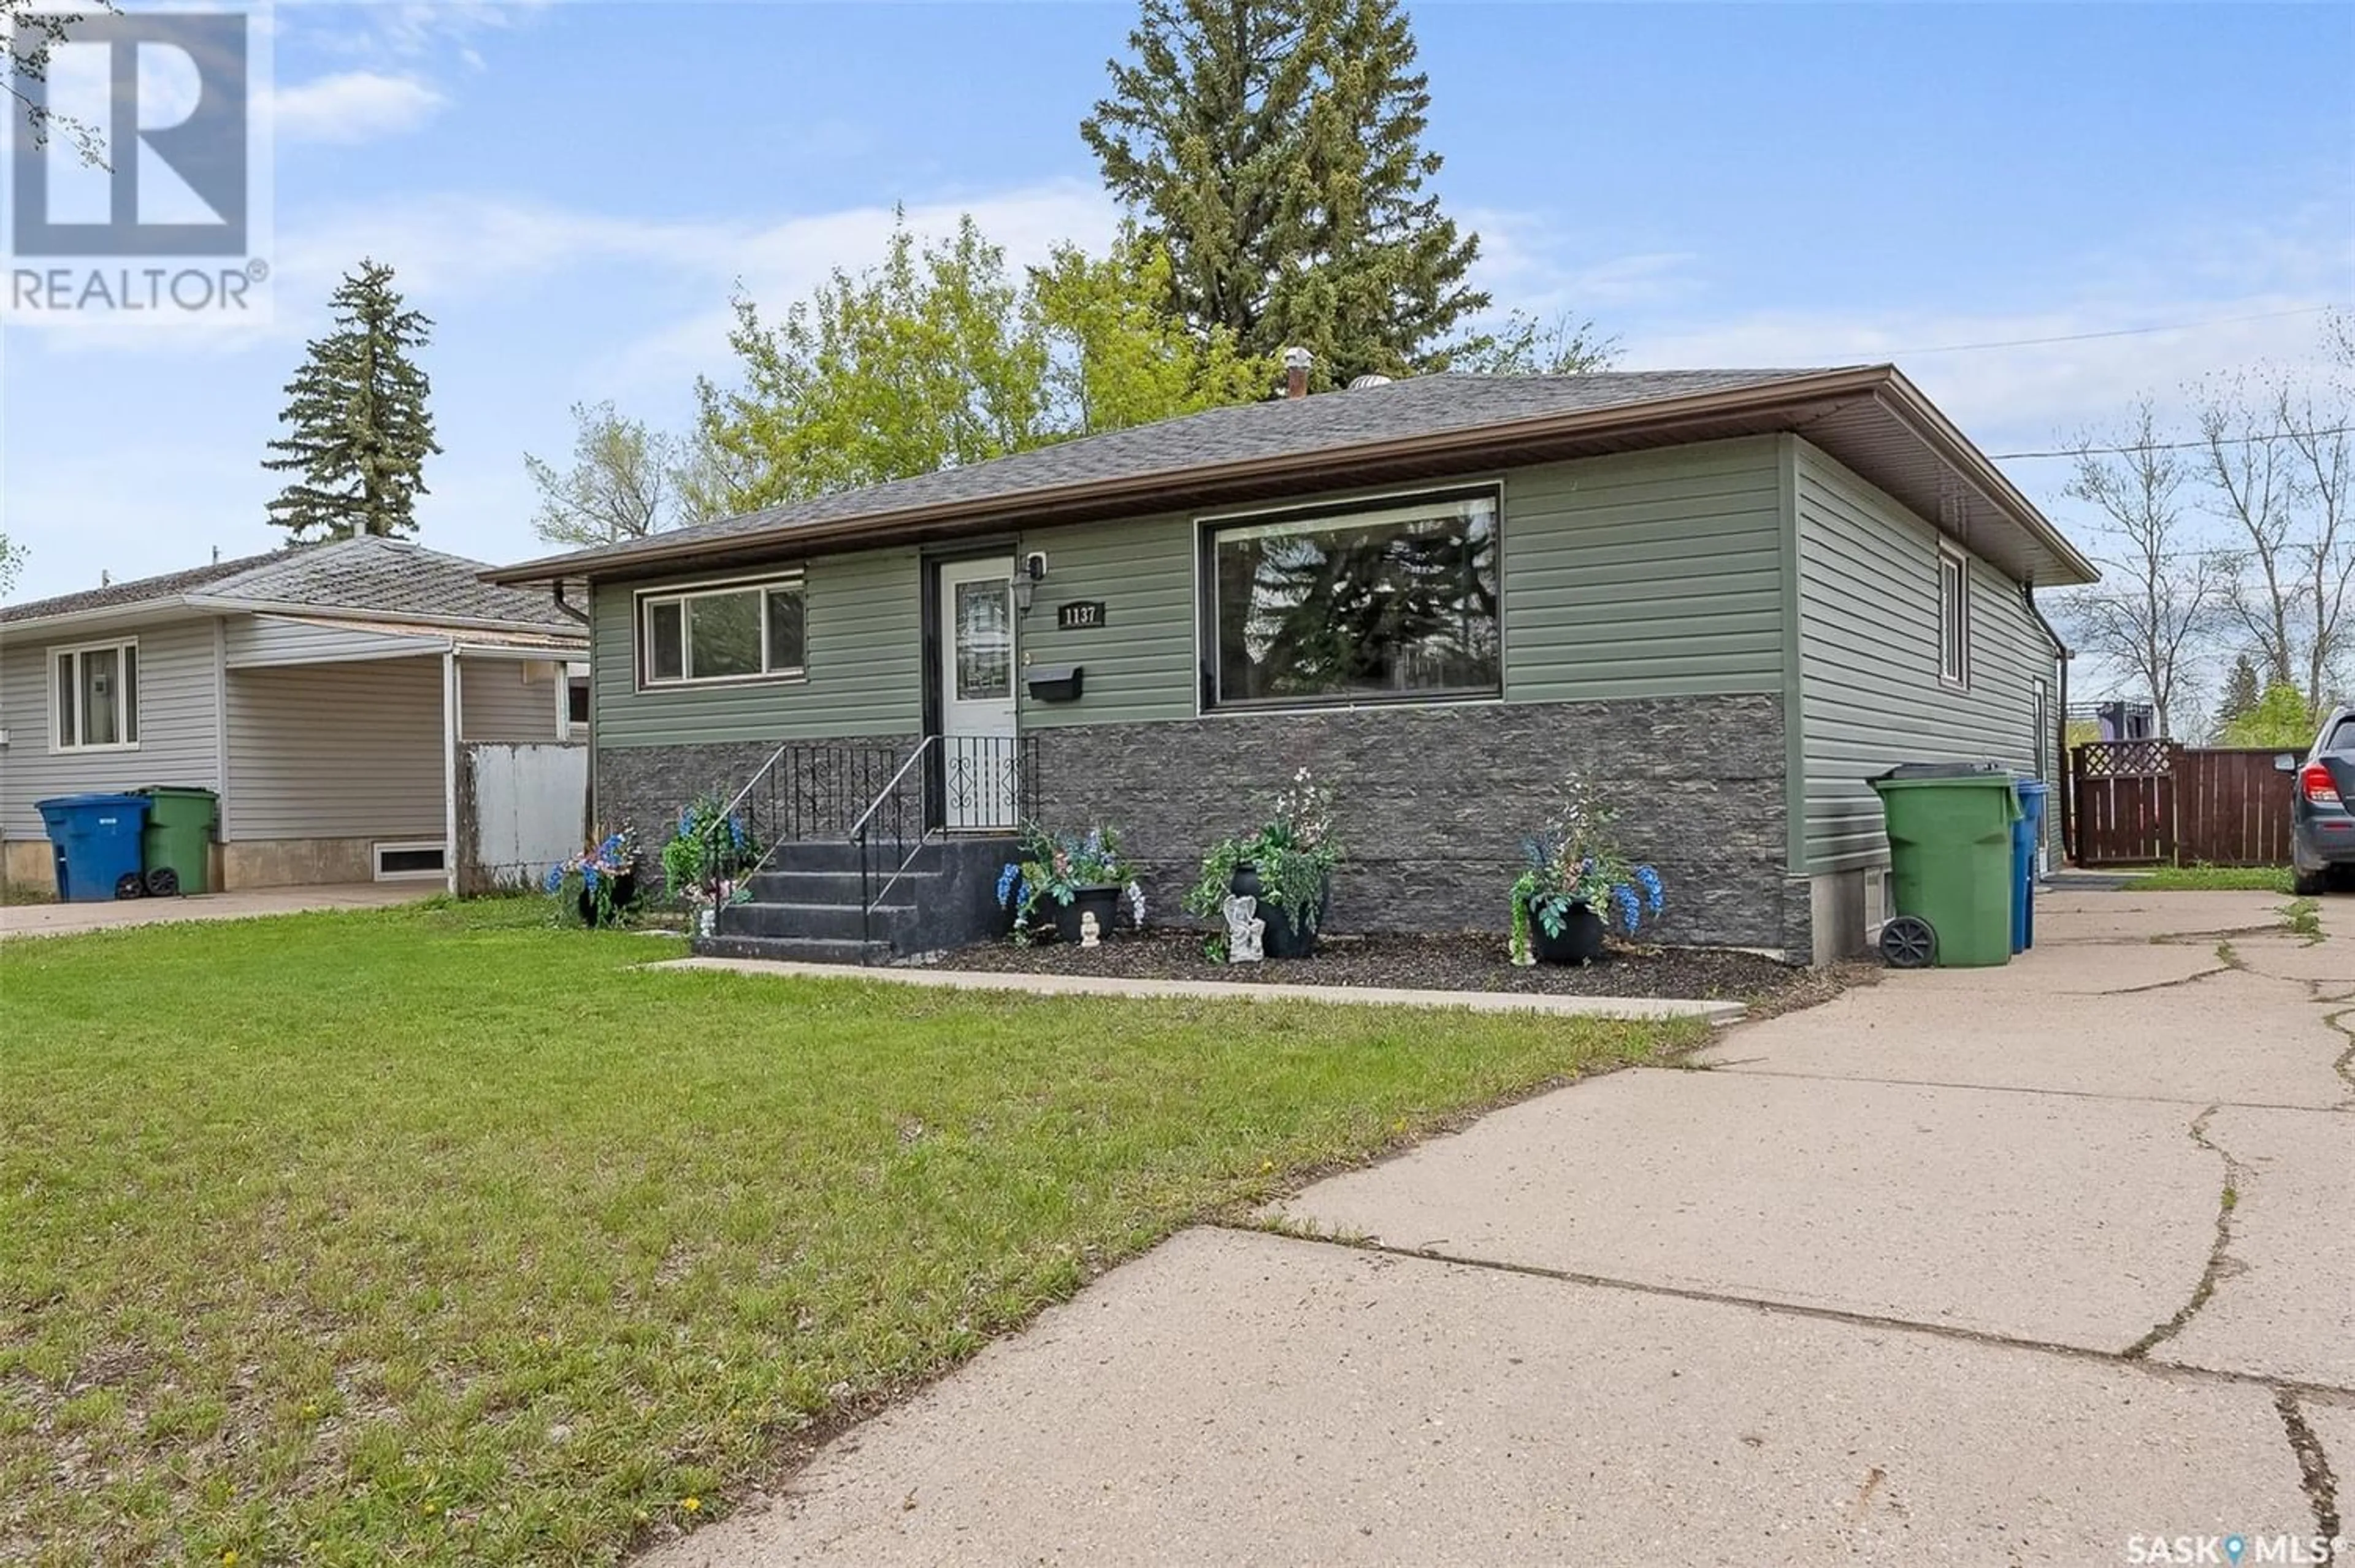 Frontside or backside of a home for 1137 13th AVENUE NW, Moose Jaw Saskatchewan S6H4N5